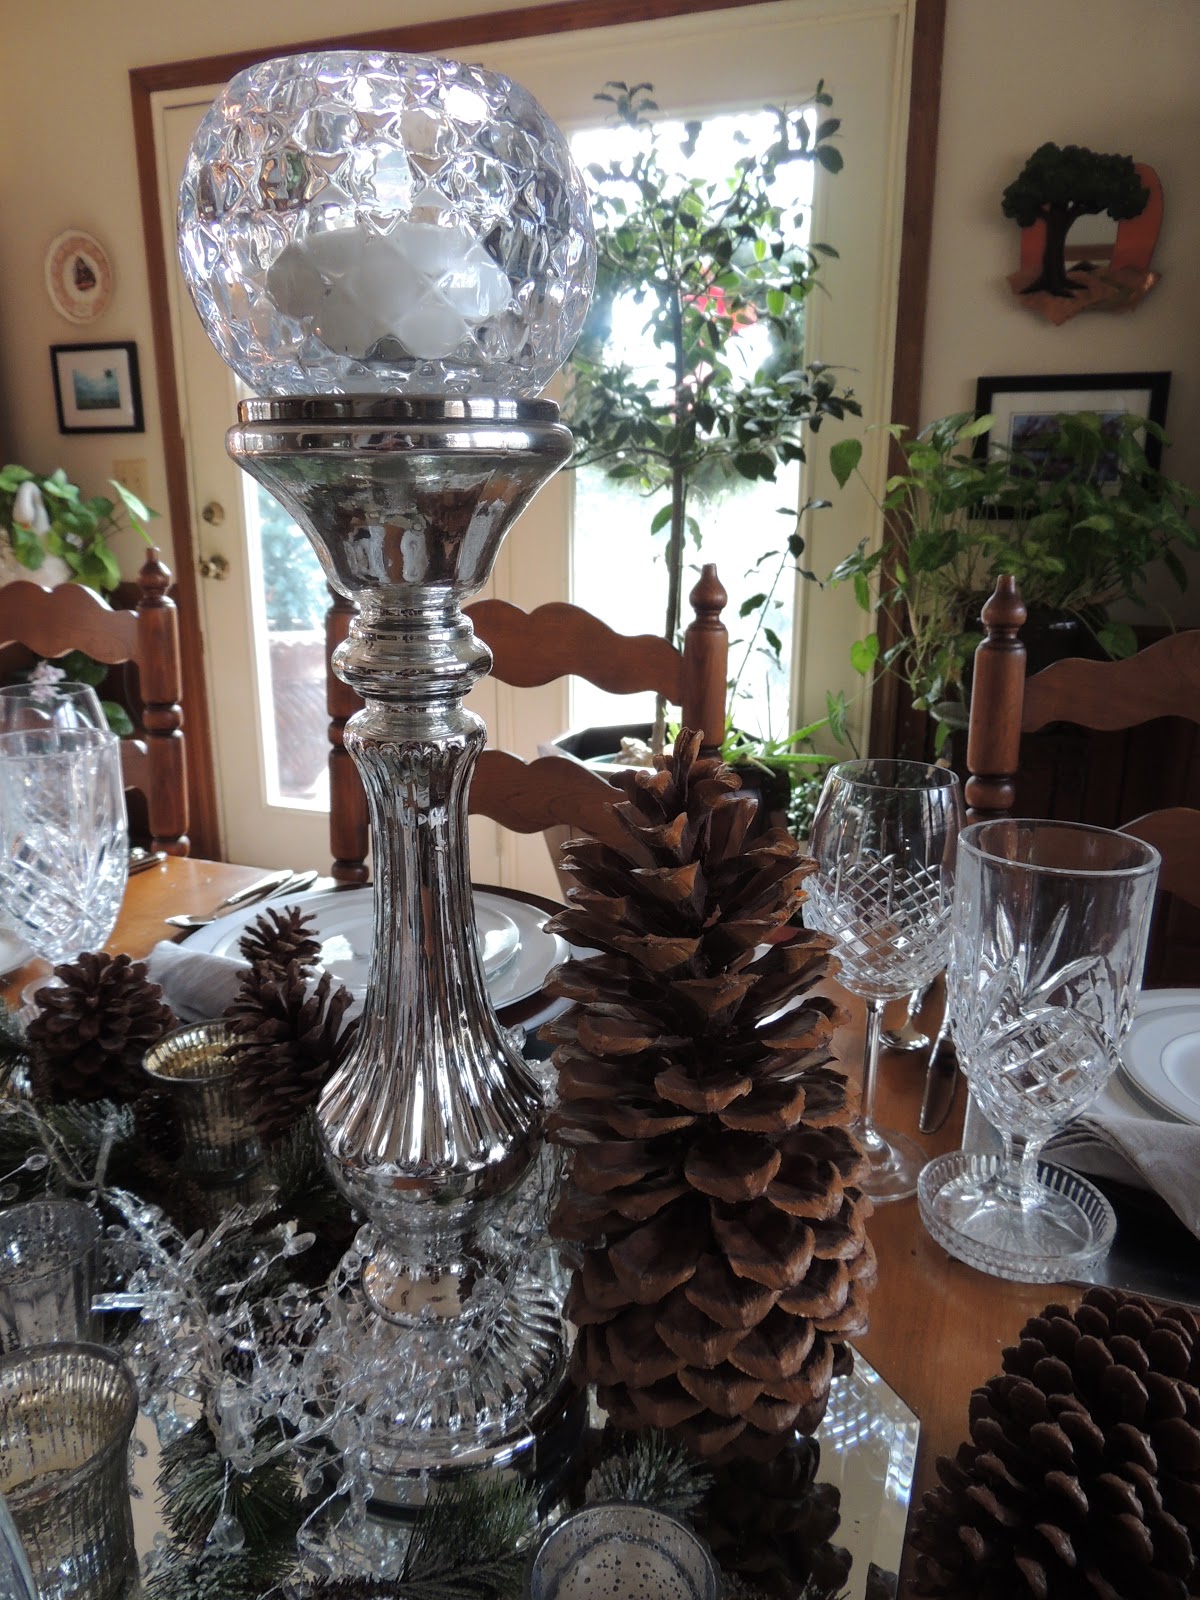 Dianne's Creative Table: Pining for Silver Pine